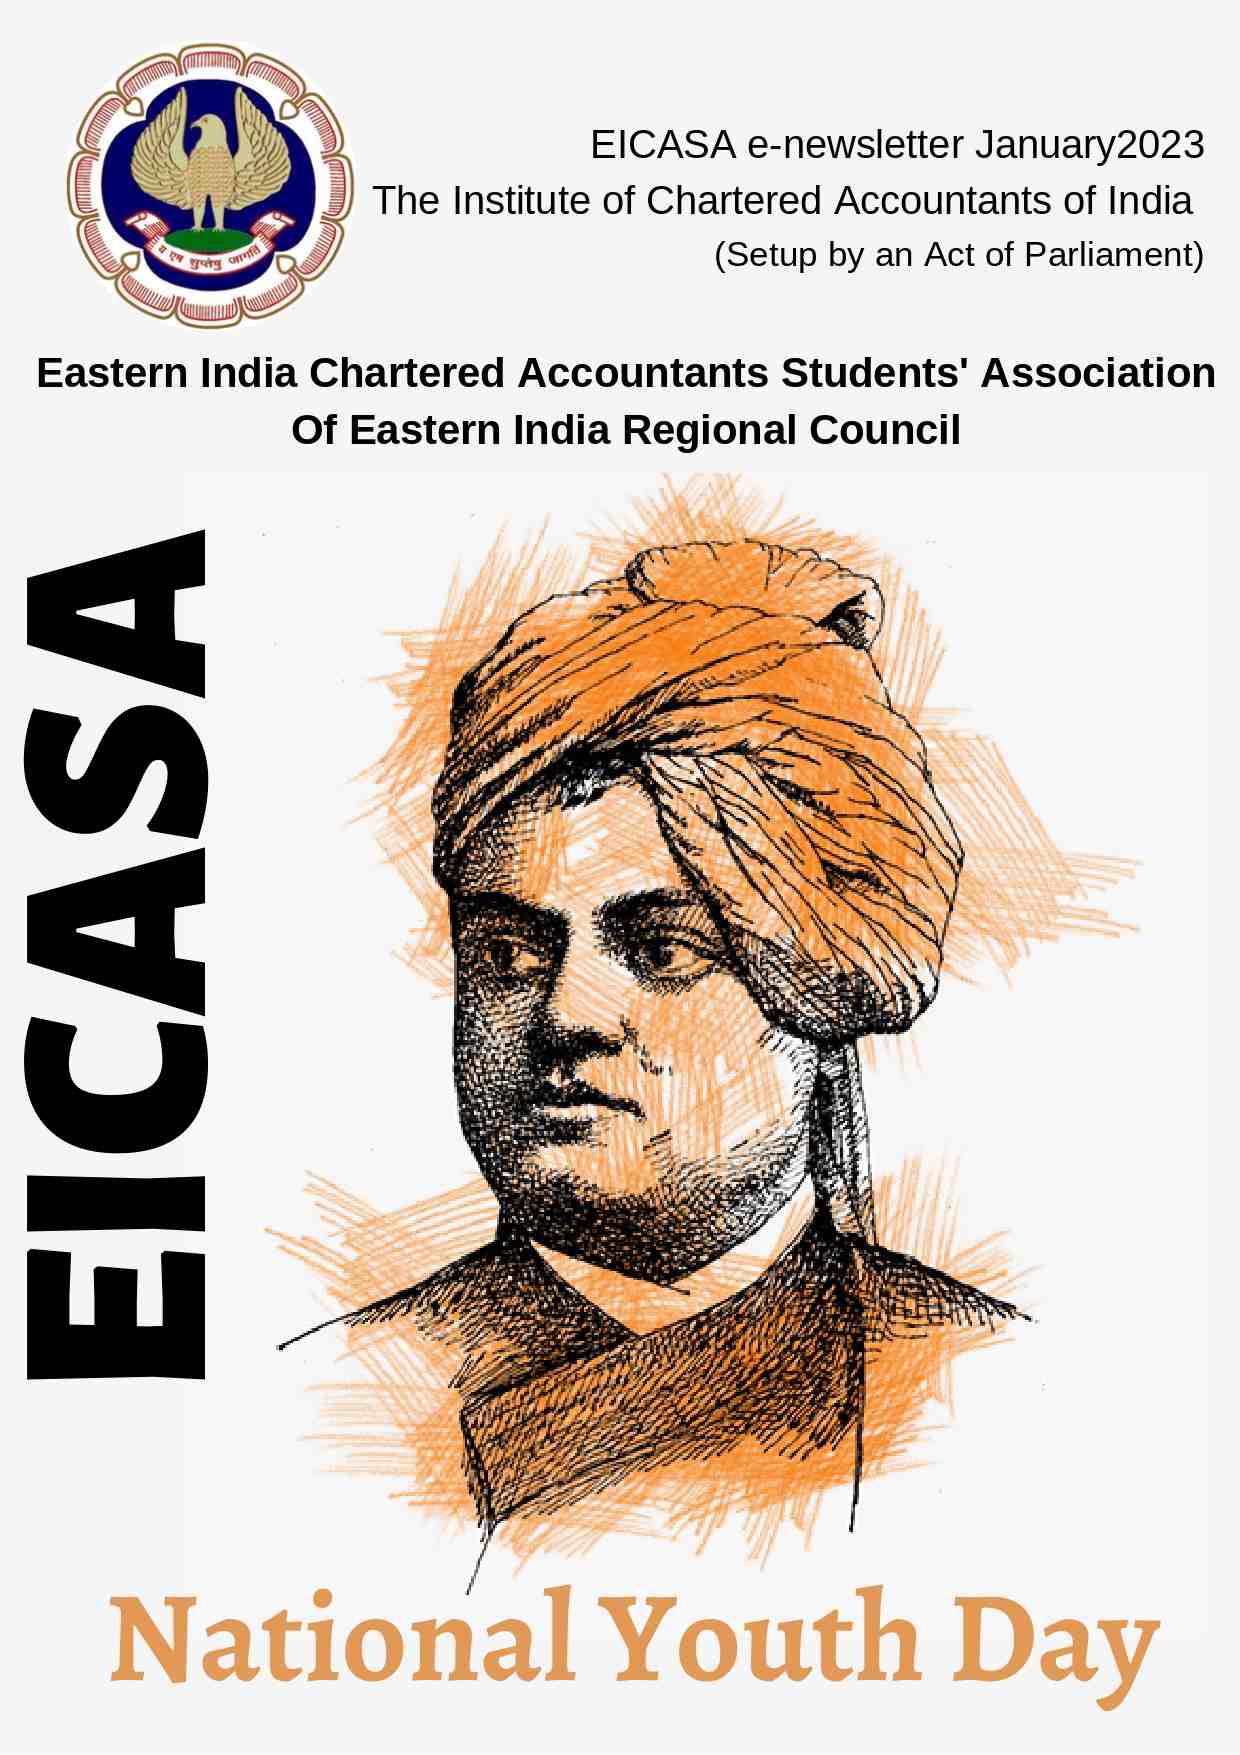 https://eirc-icai.org/uploads/newsletter/January_E-newsletter_2023-1Coverpage_page-0001_1681886973.jpg